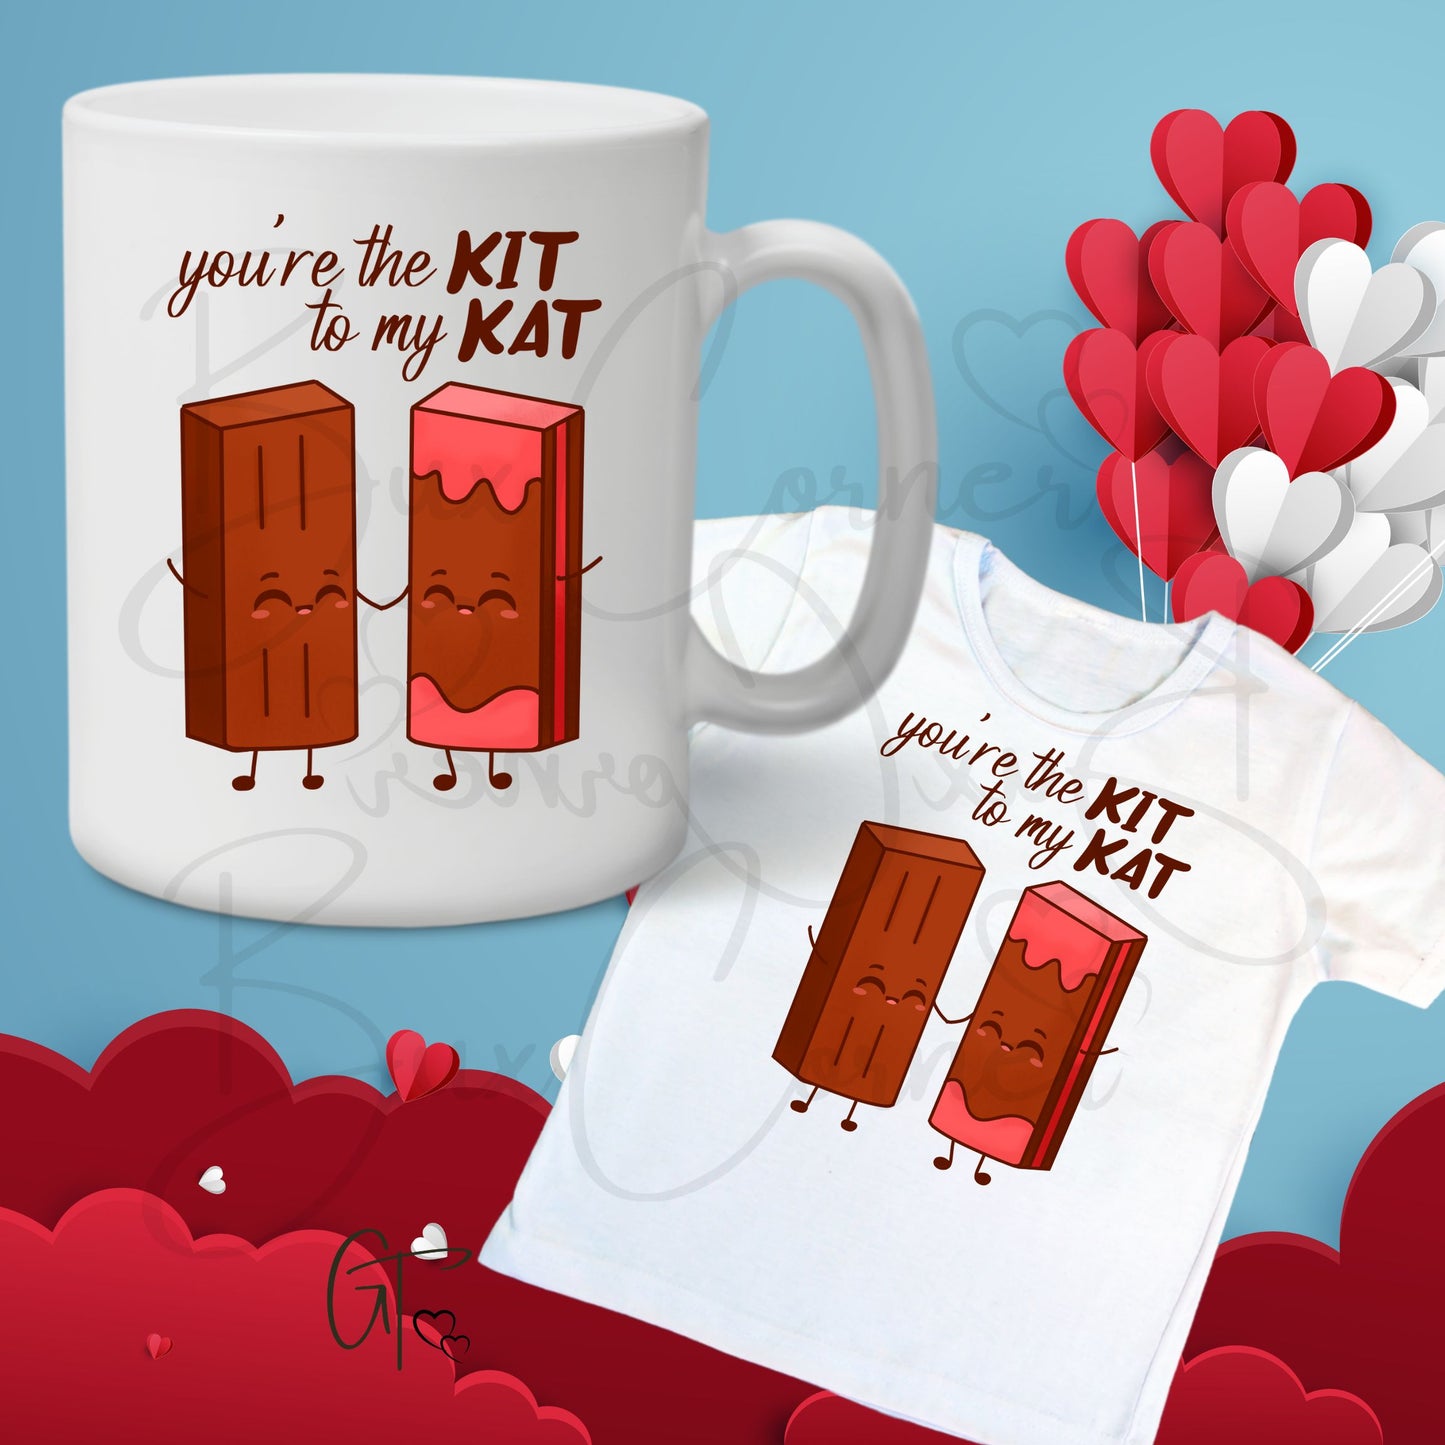 You're the KIT to my KAT Valentine Pun SUBLIMATION TRANSFER